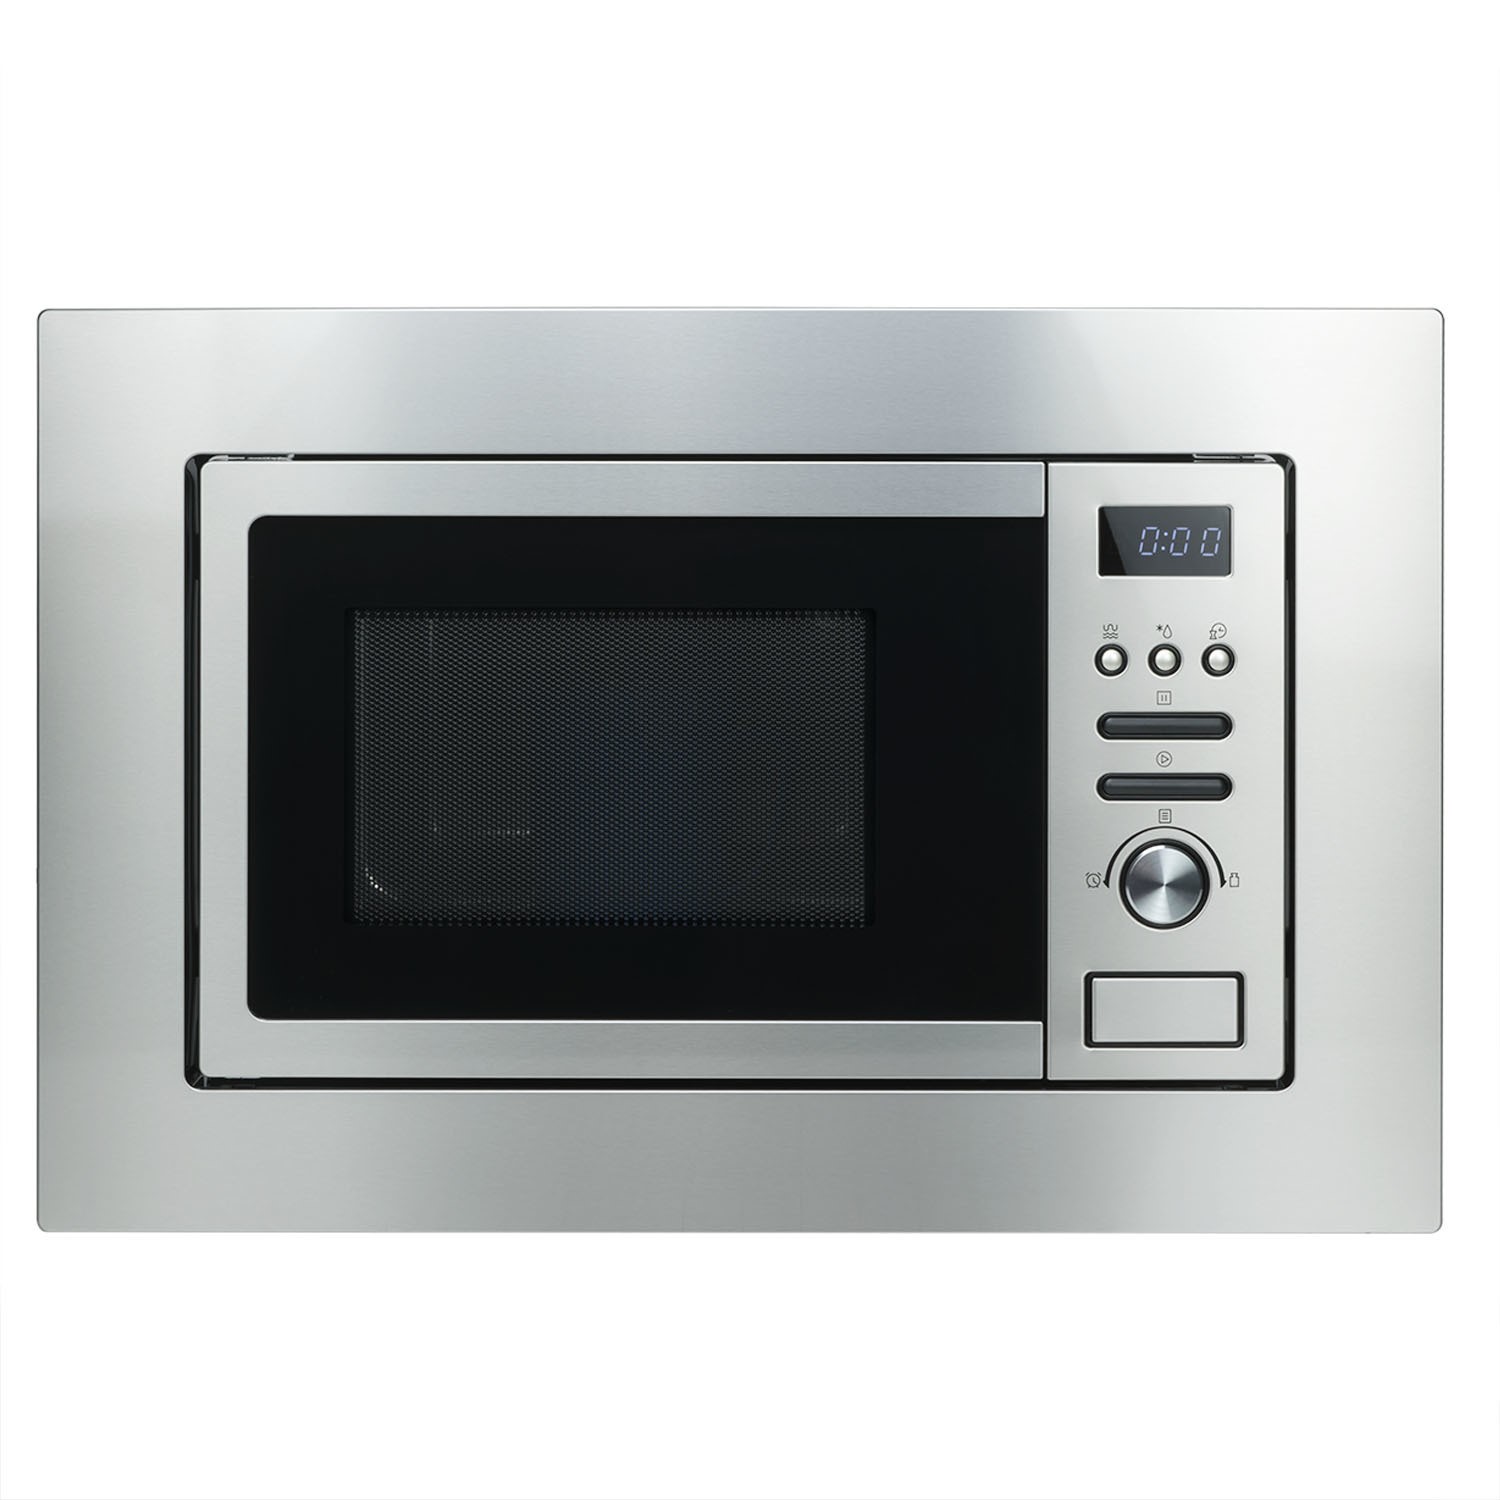 20L Integrated Digital Microwave with Grill in Stainless Steel